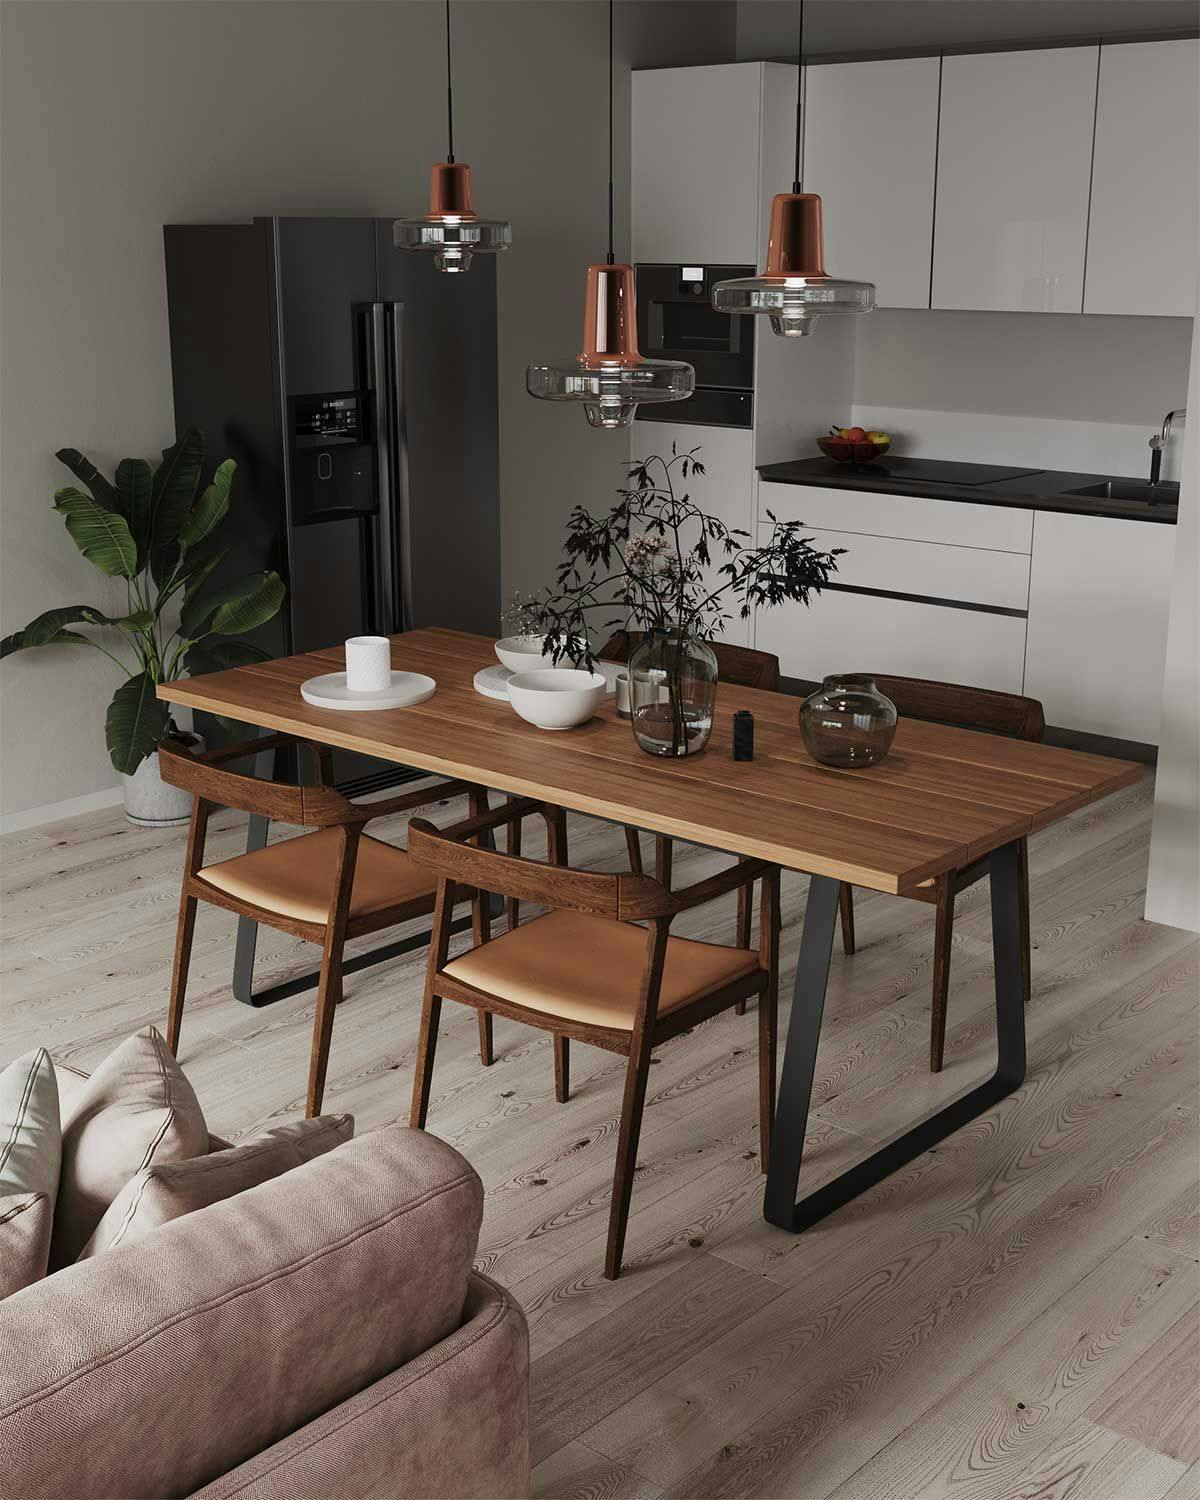 3D Interior Visualization with the interior design of a dining room with a kitchen of the real estate in Berlin.